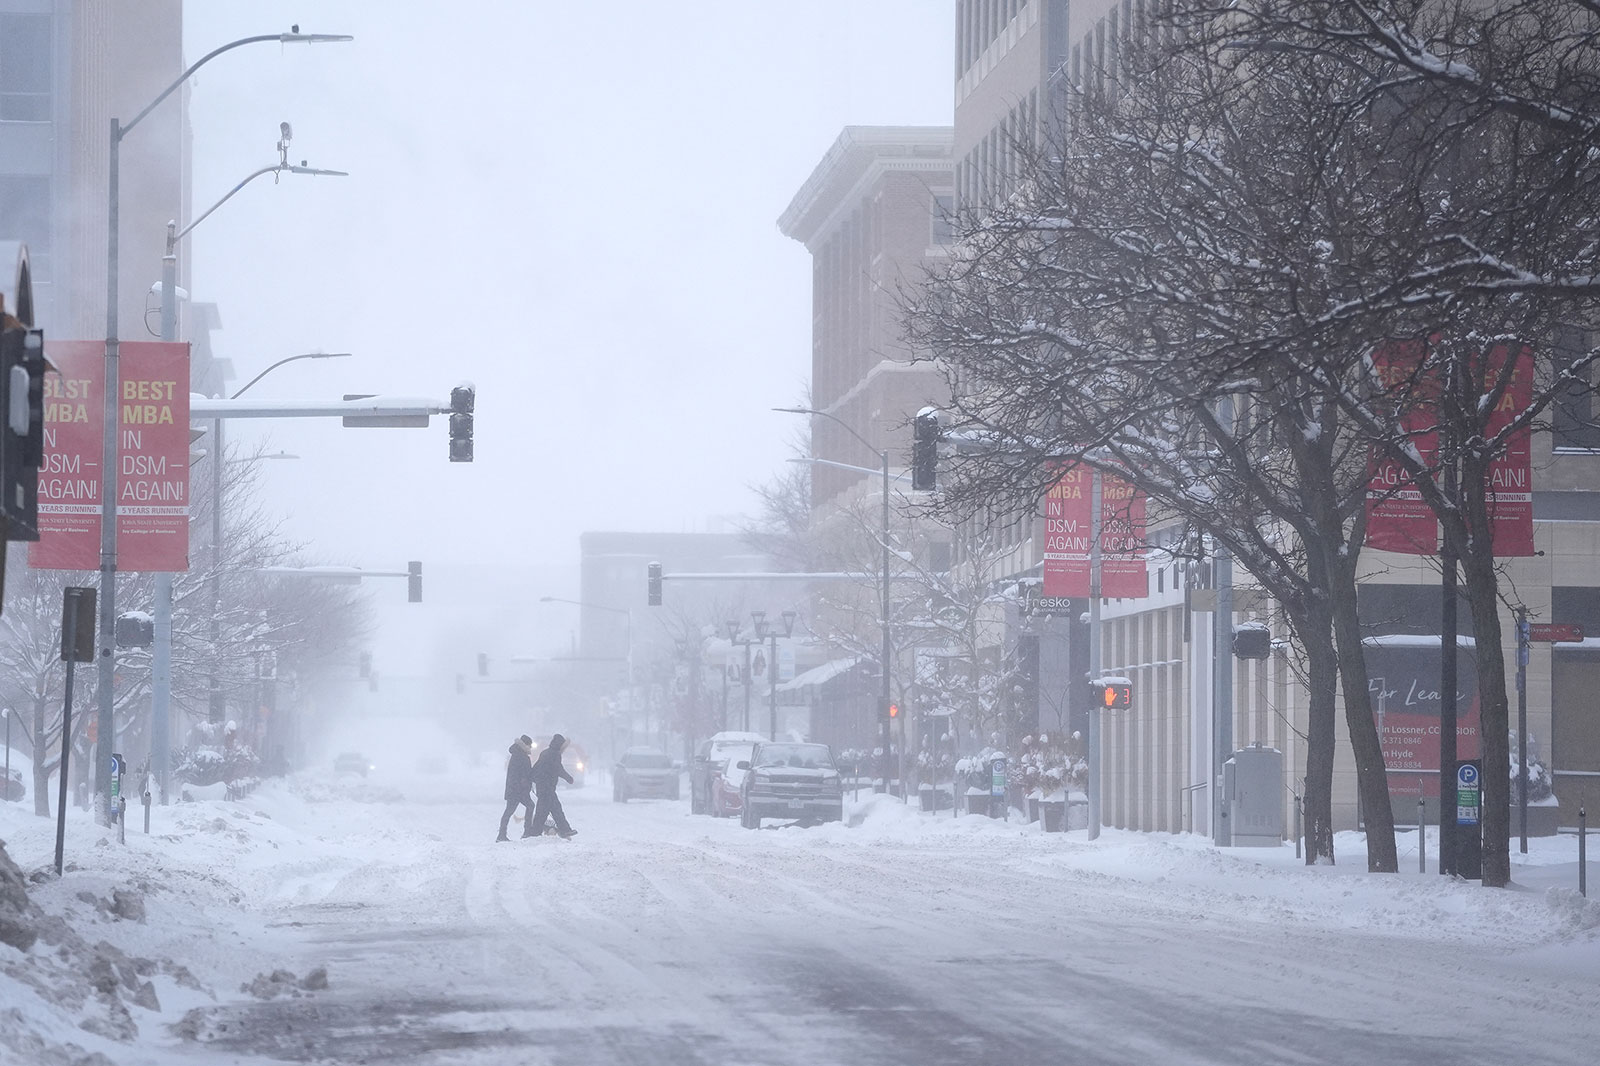 Pedestrians cross the street in snowy conditions on Friday in Des Moines, Iowa. 